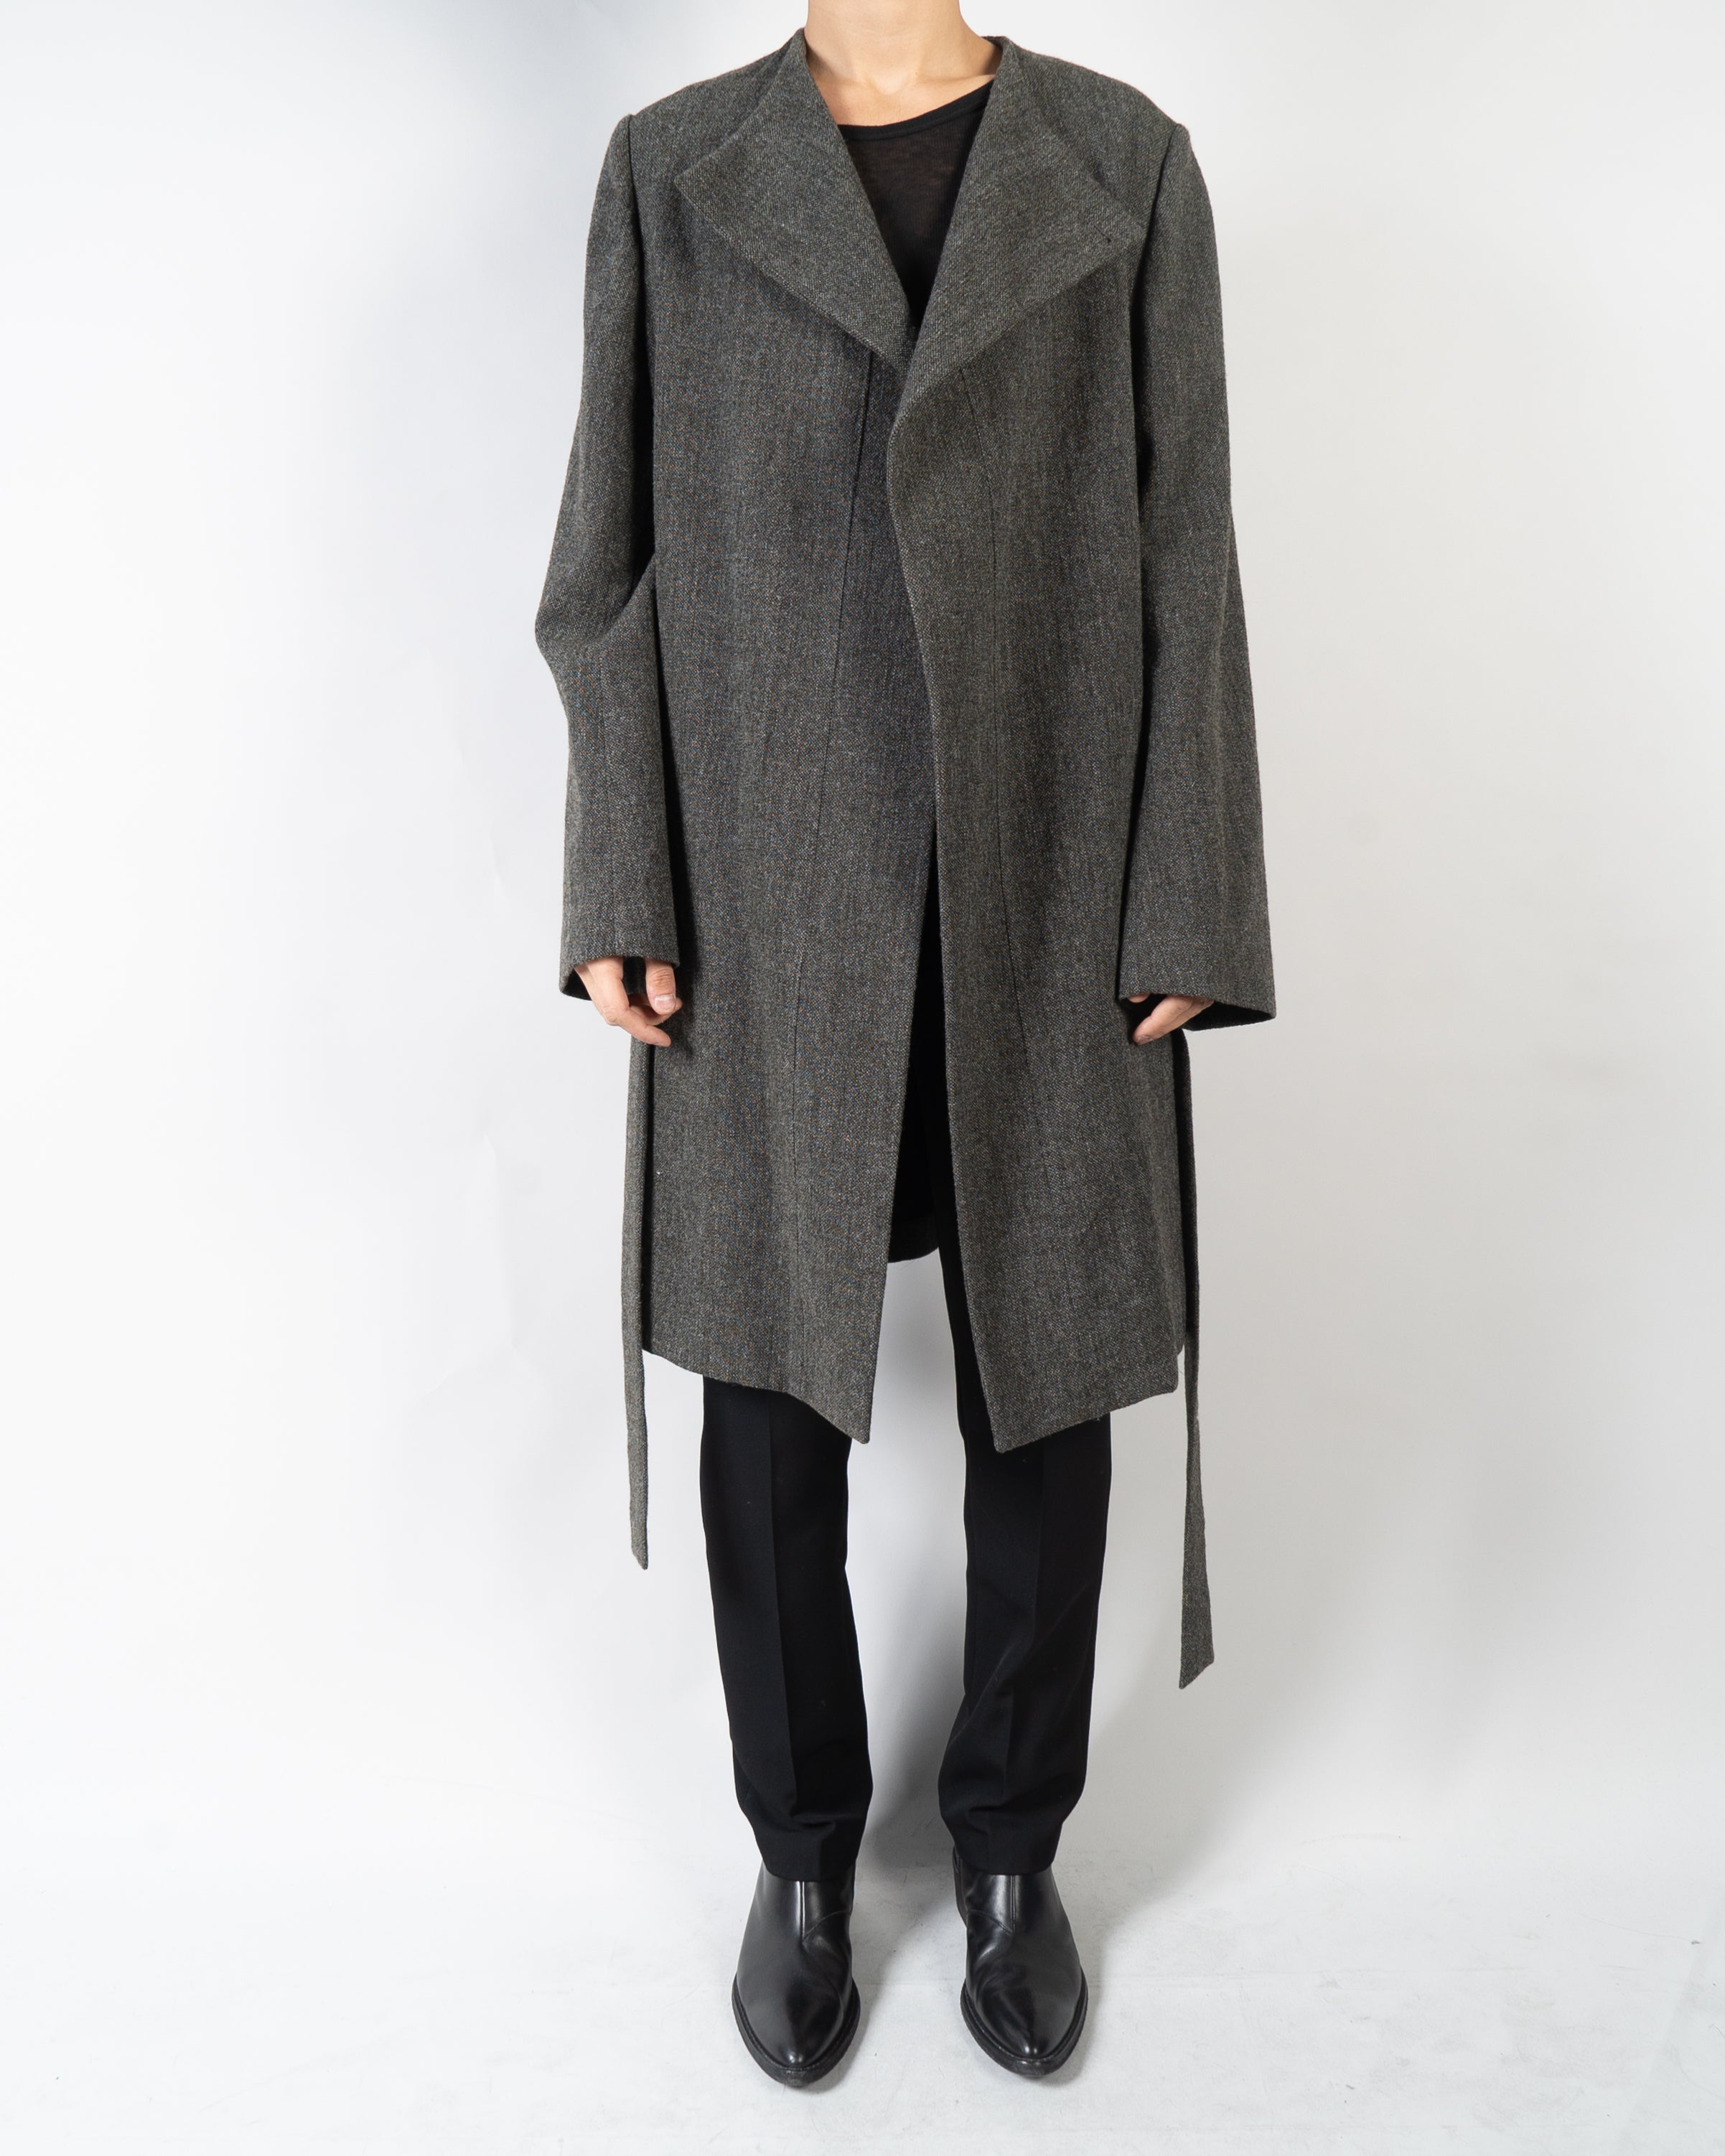 FW06 Anthracite Belted Wool Coat Sample